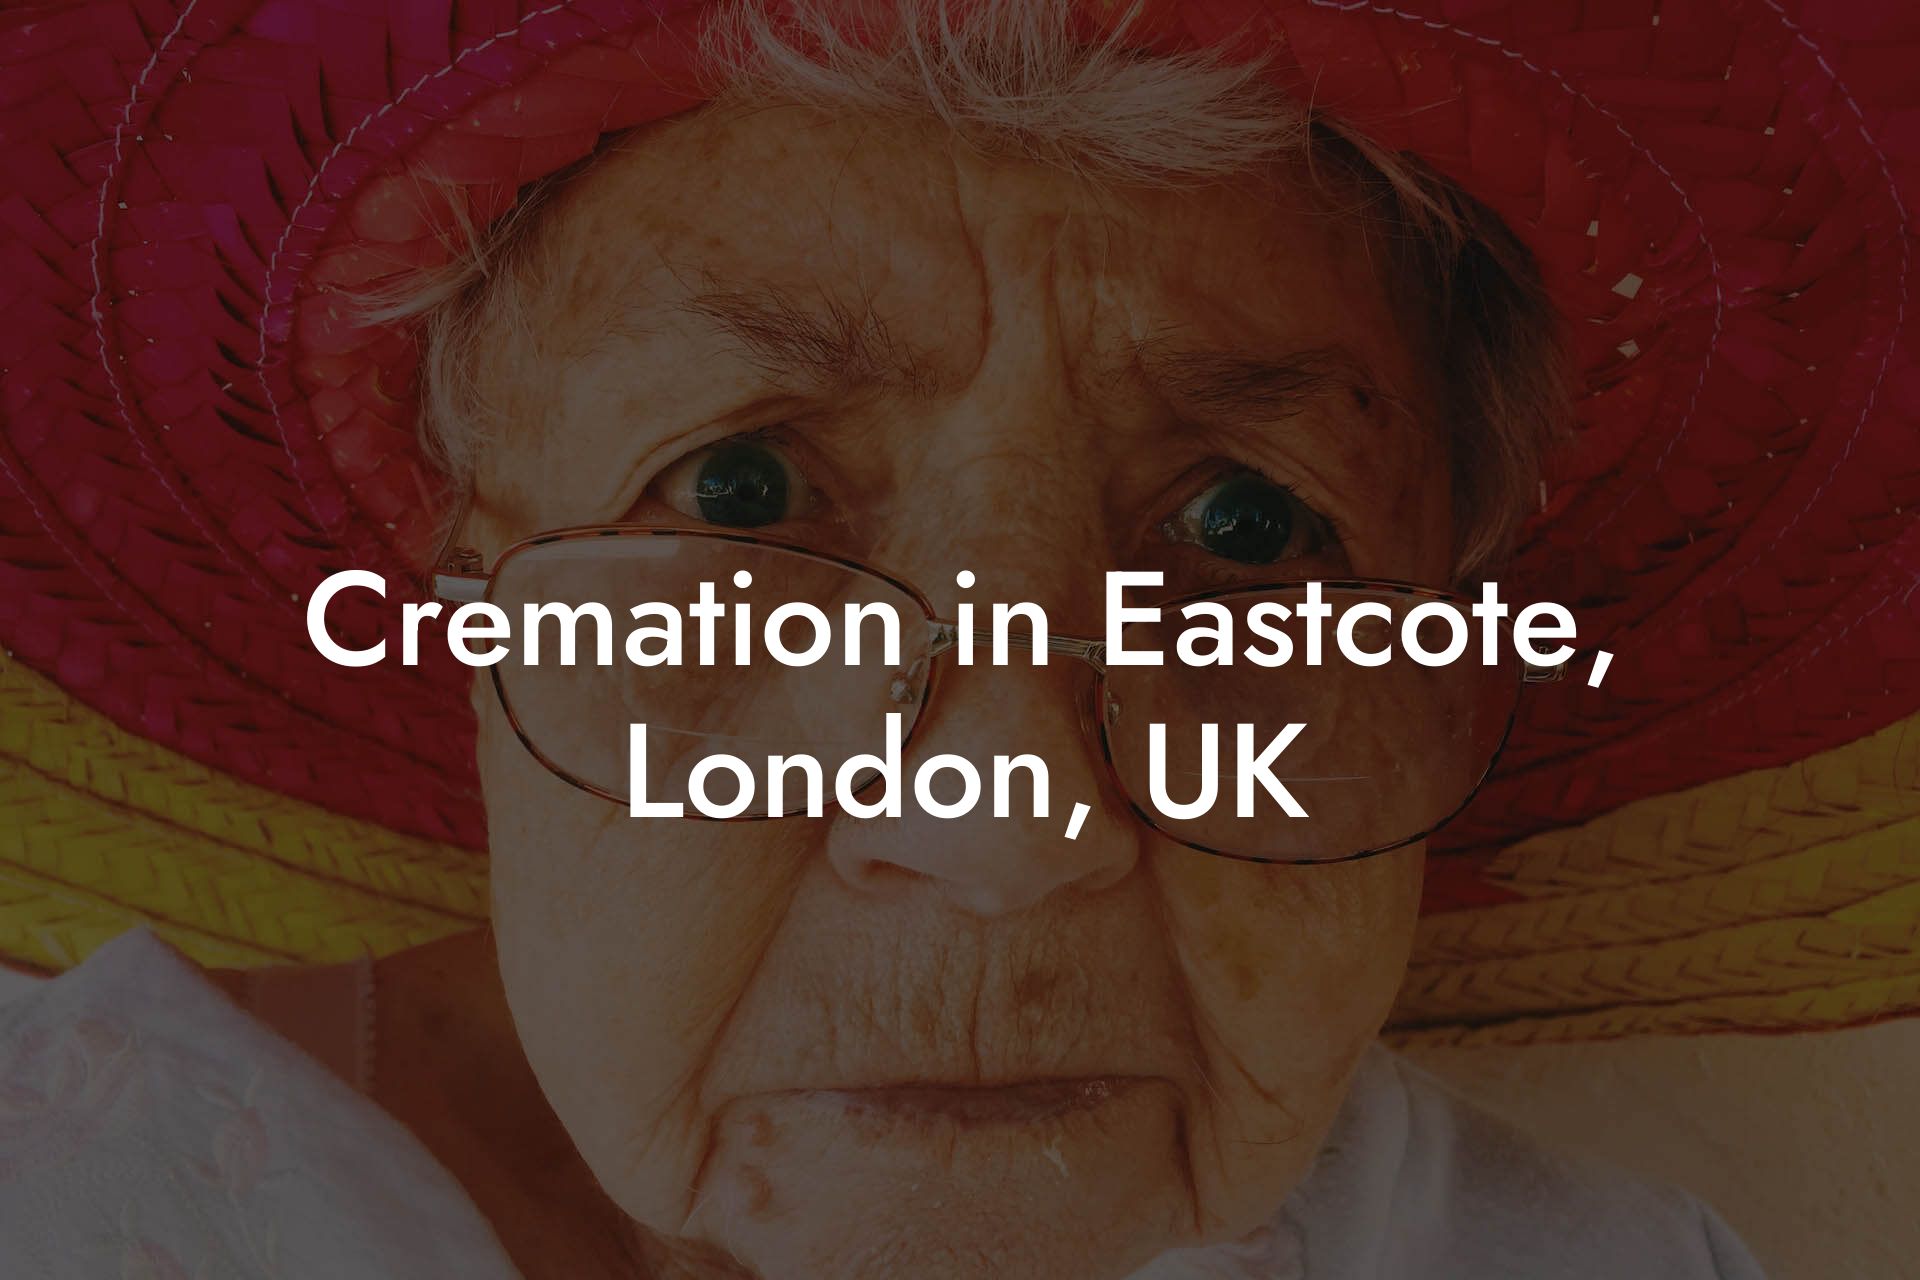 Cremation in Eastcote, London, UK